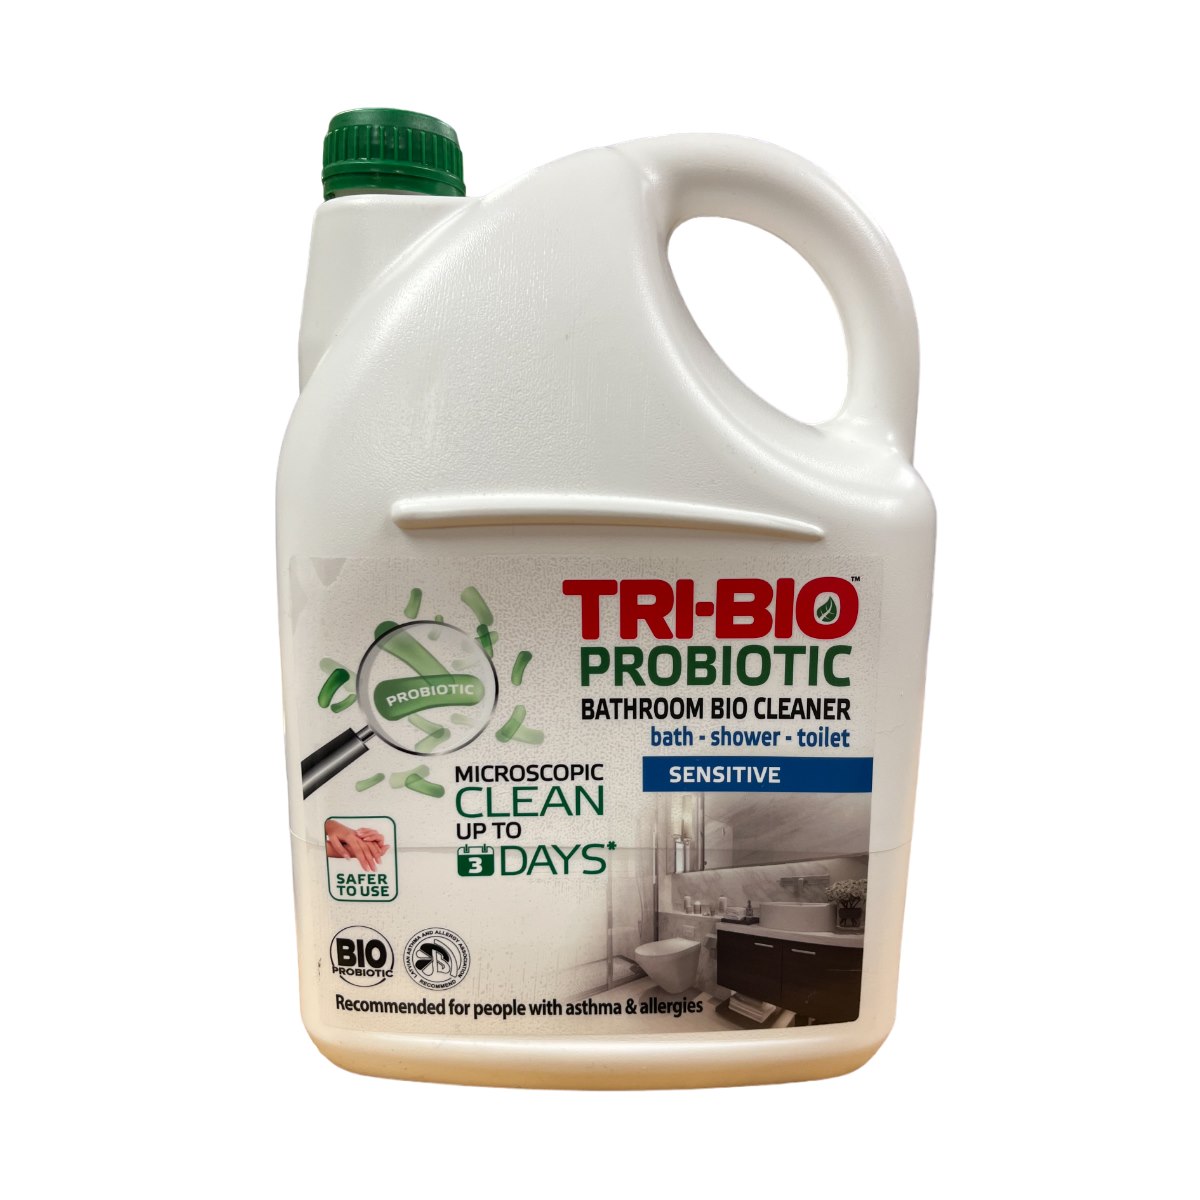 Tri-Bio Probiotic Bathroom Shower and Toilet Cleaner Spray Refill 4.4 Litre